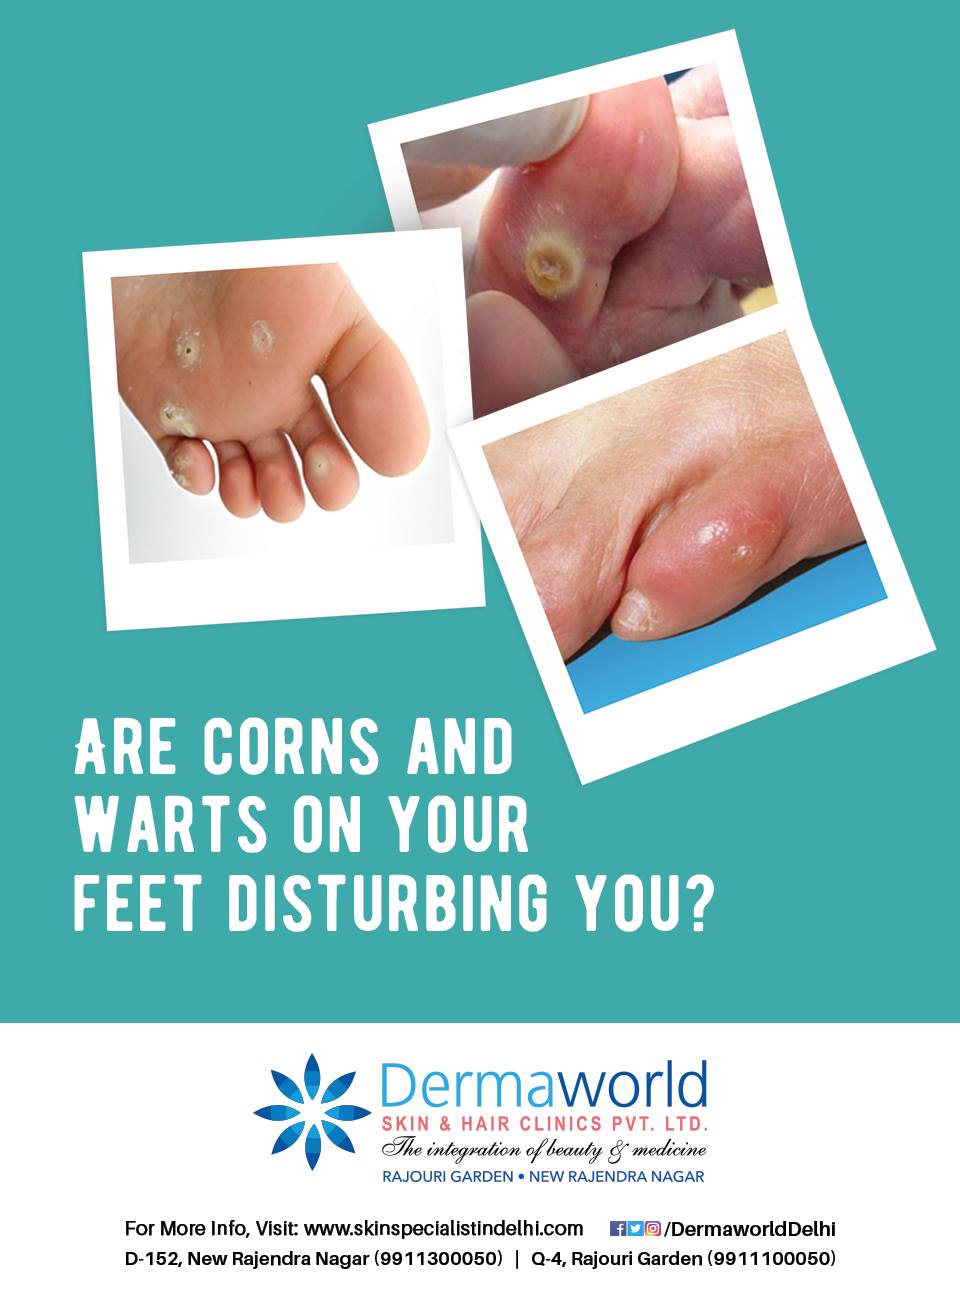 Best treatment for warts & corns